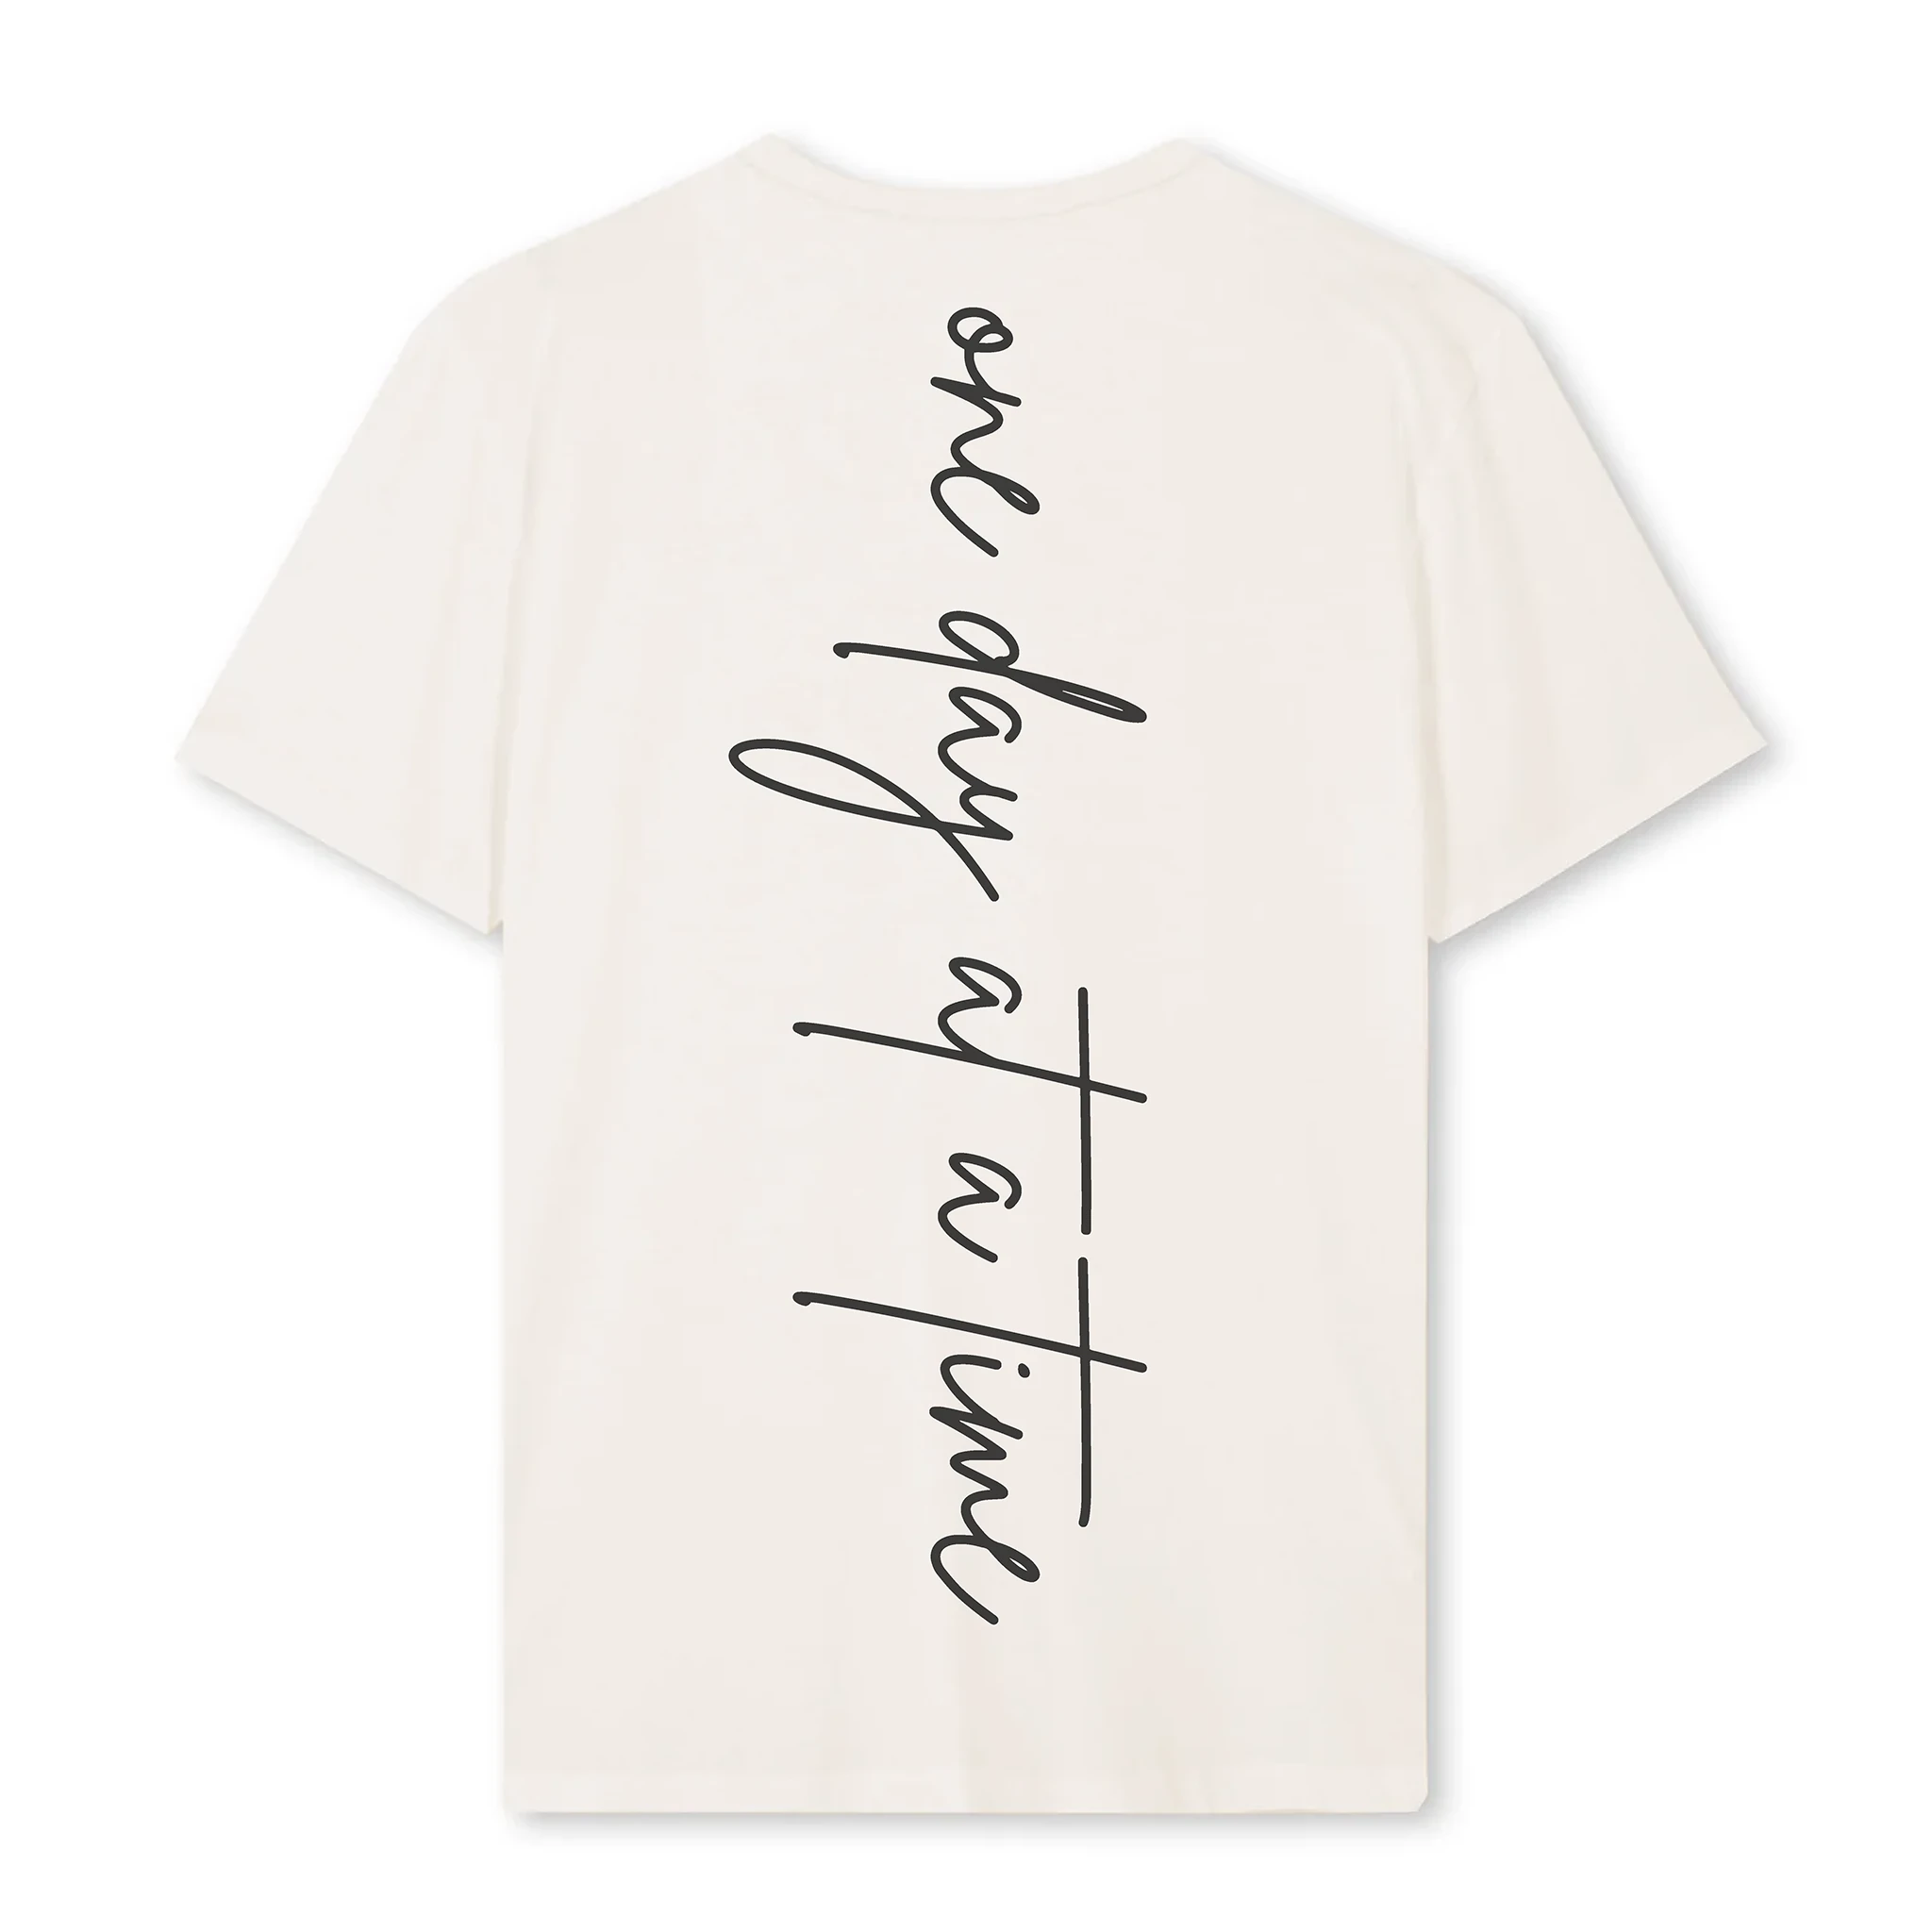 ODAAT Apparel, vintage white t-shirt showcasing the script print along the back of the spine.